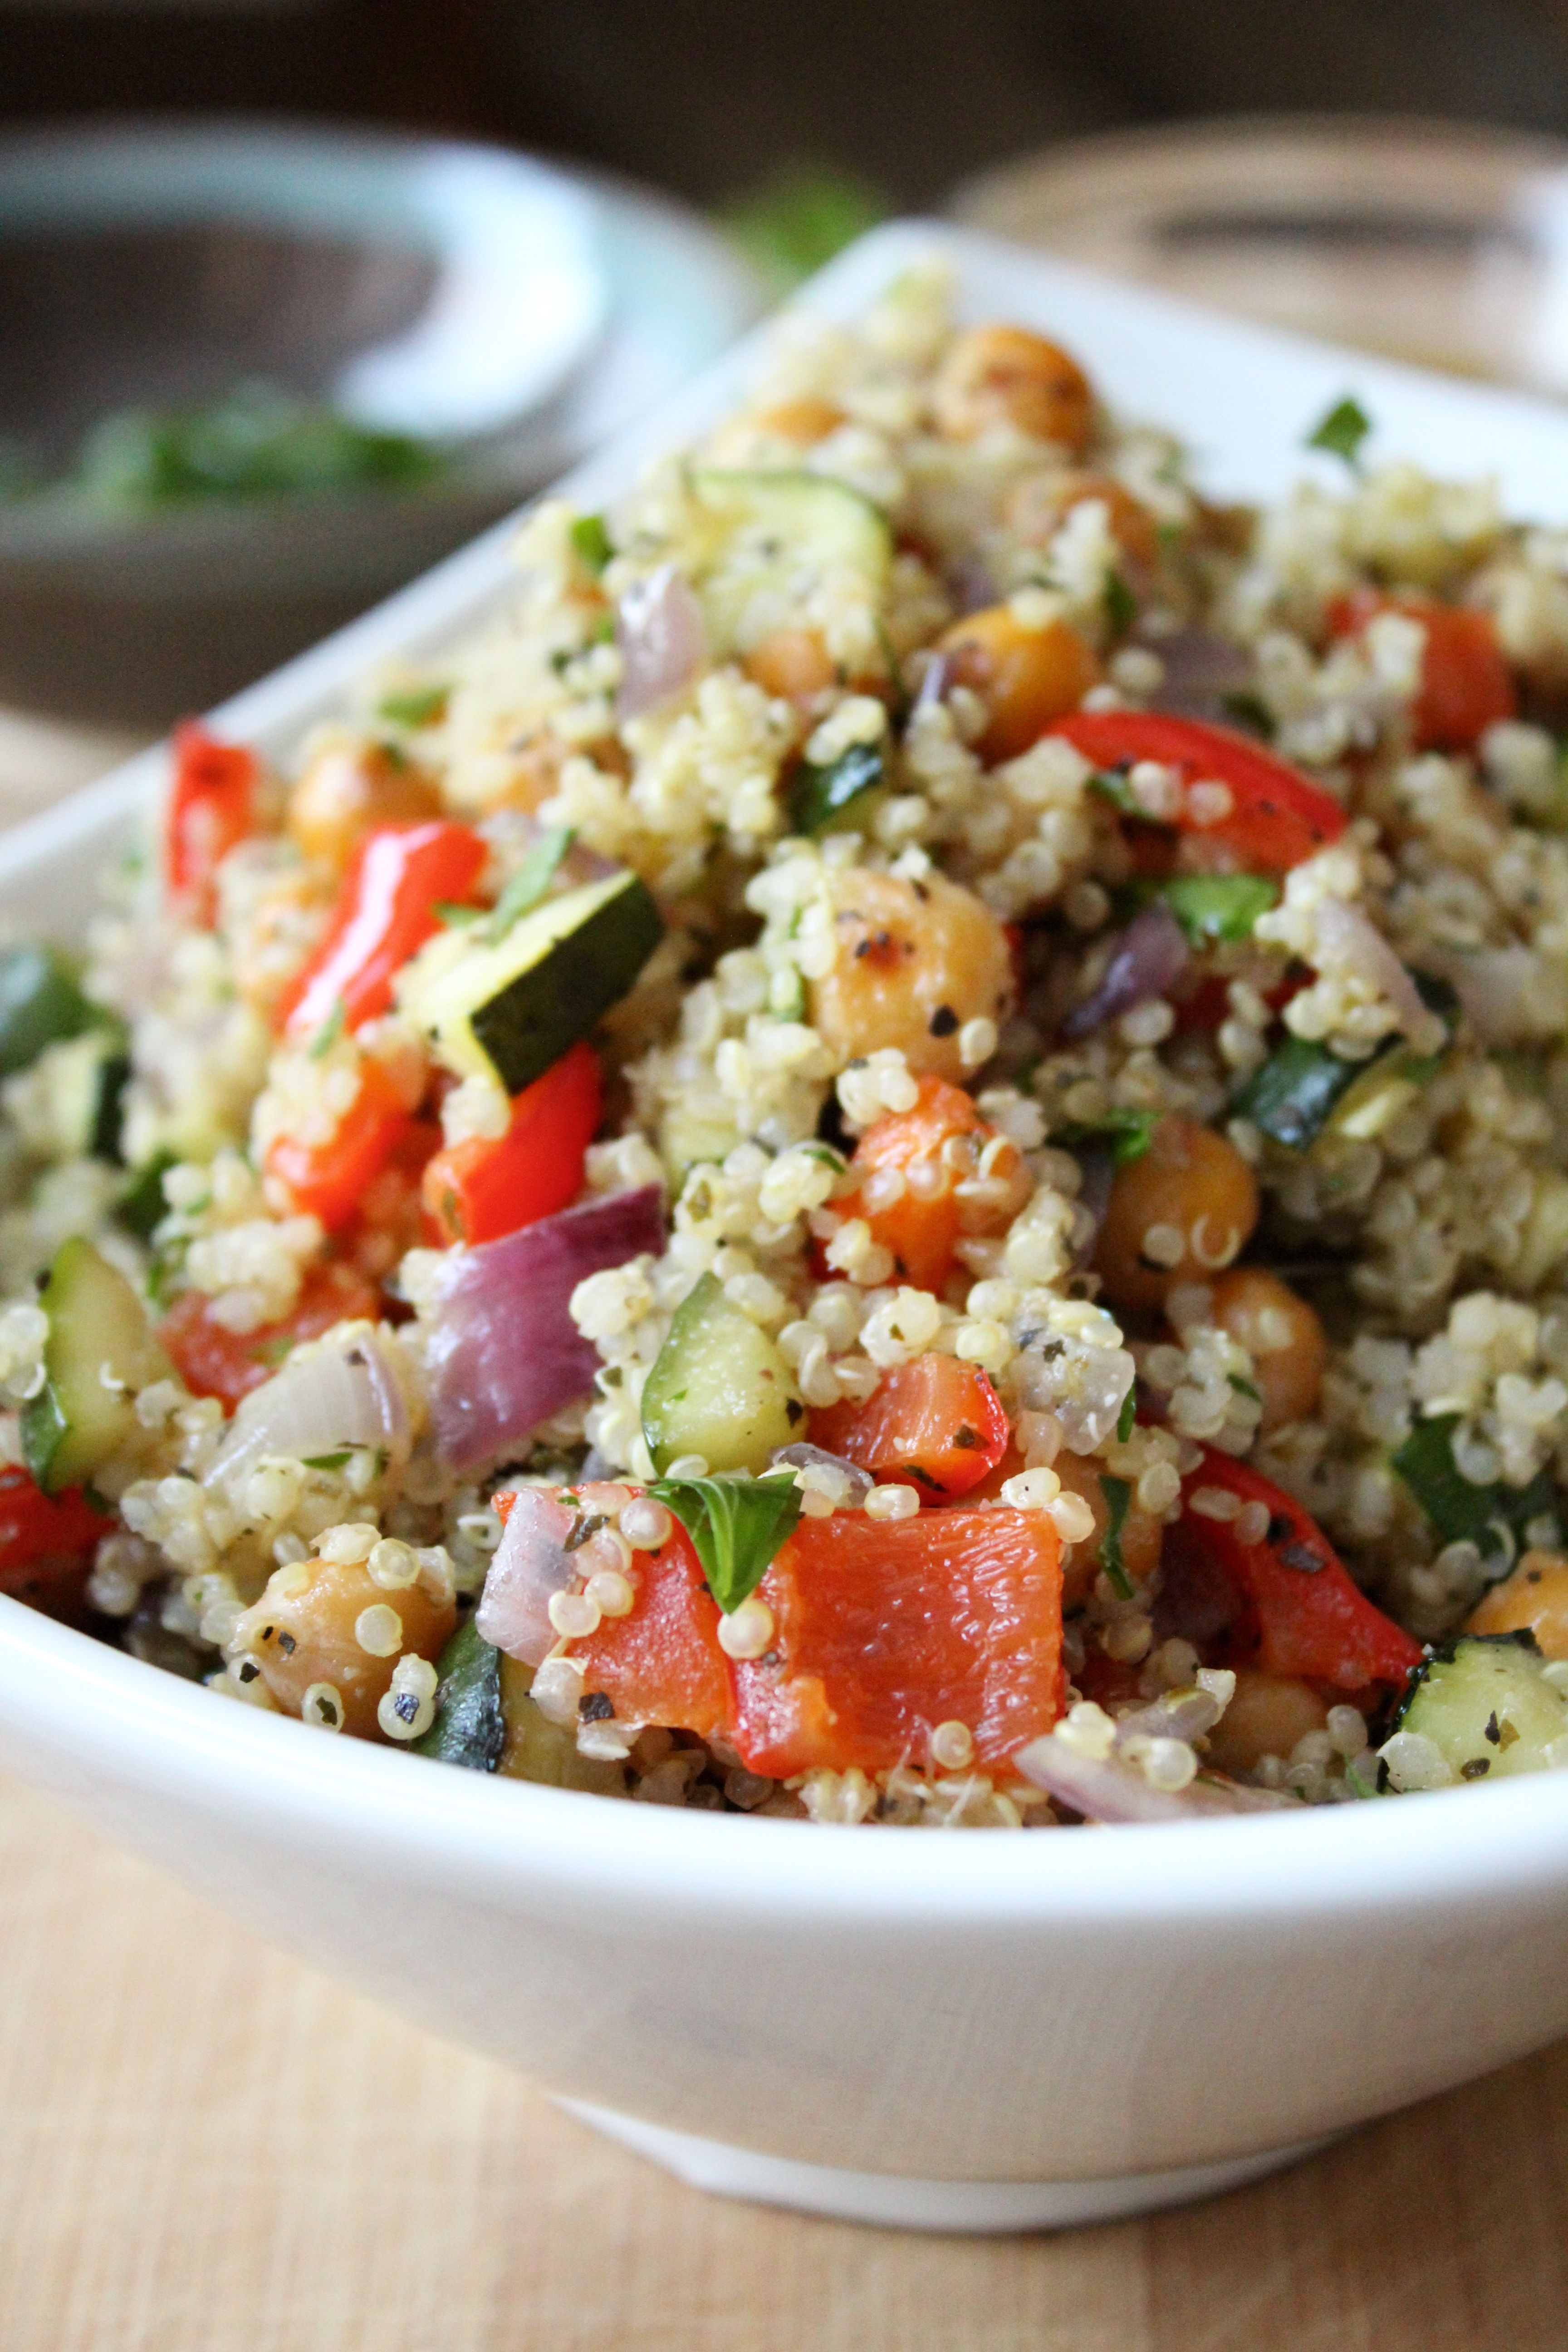 This Roasted Vegetable Quinoa Salad is delicious warm or cold!